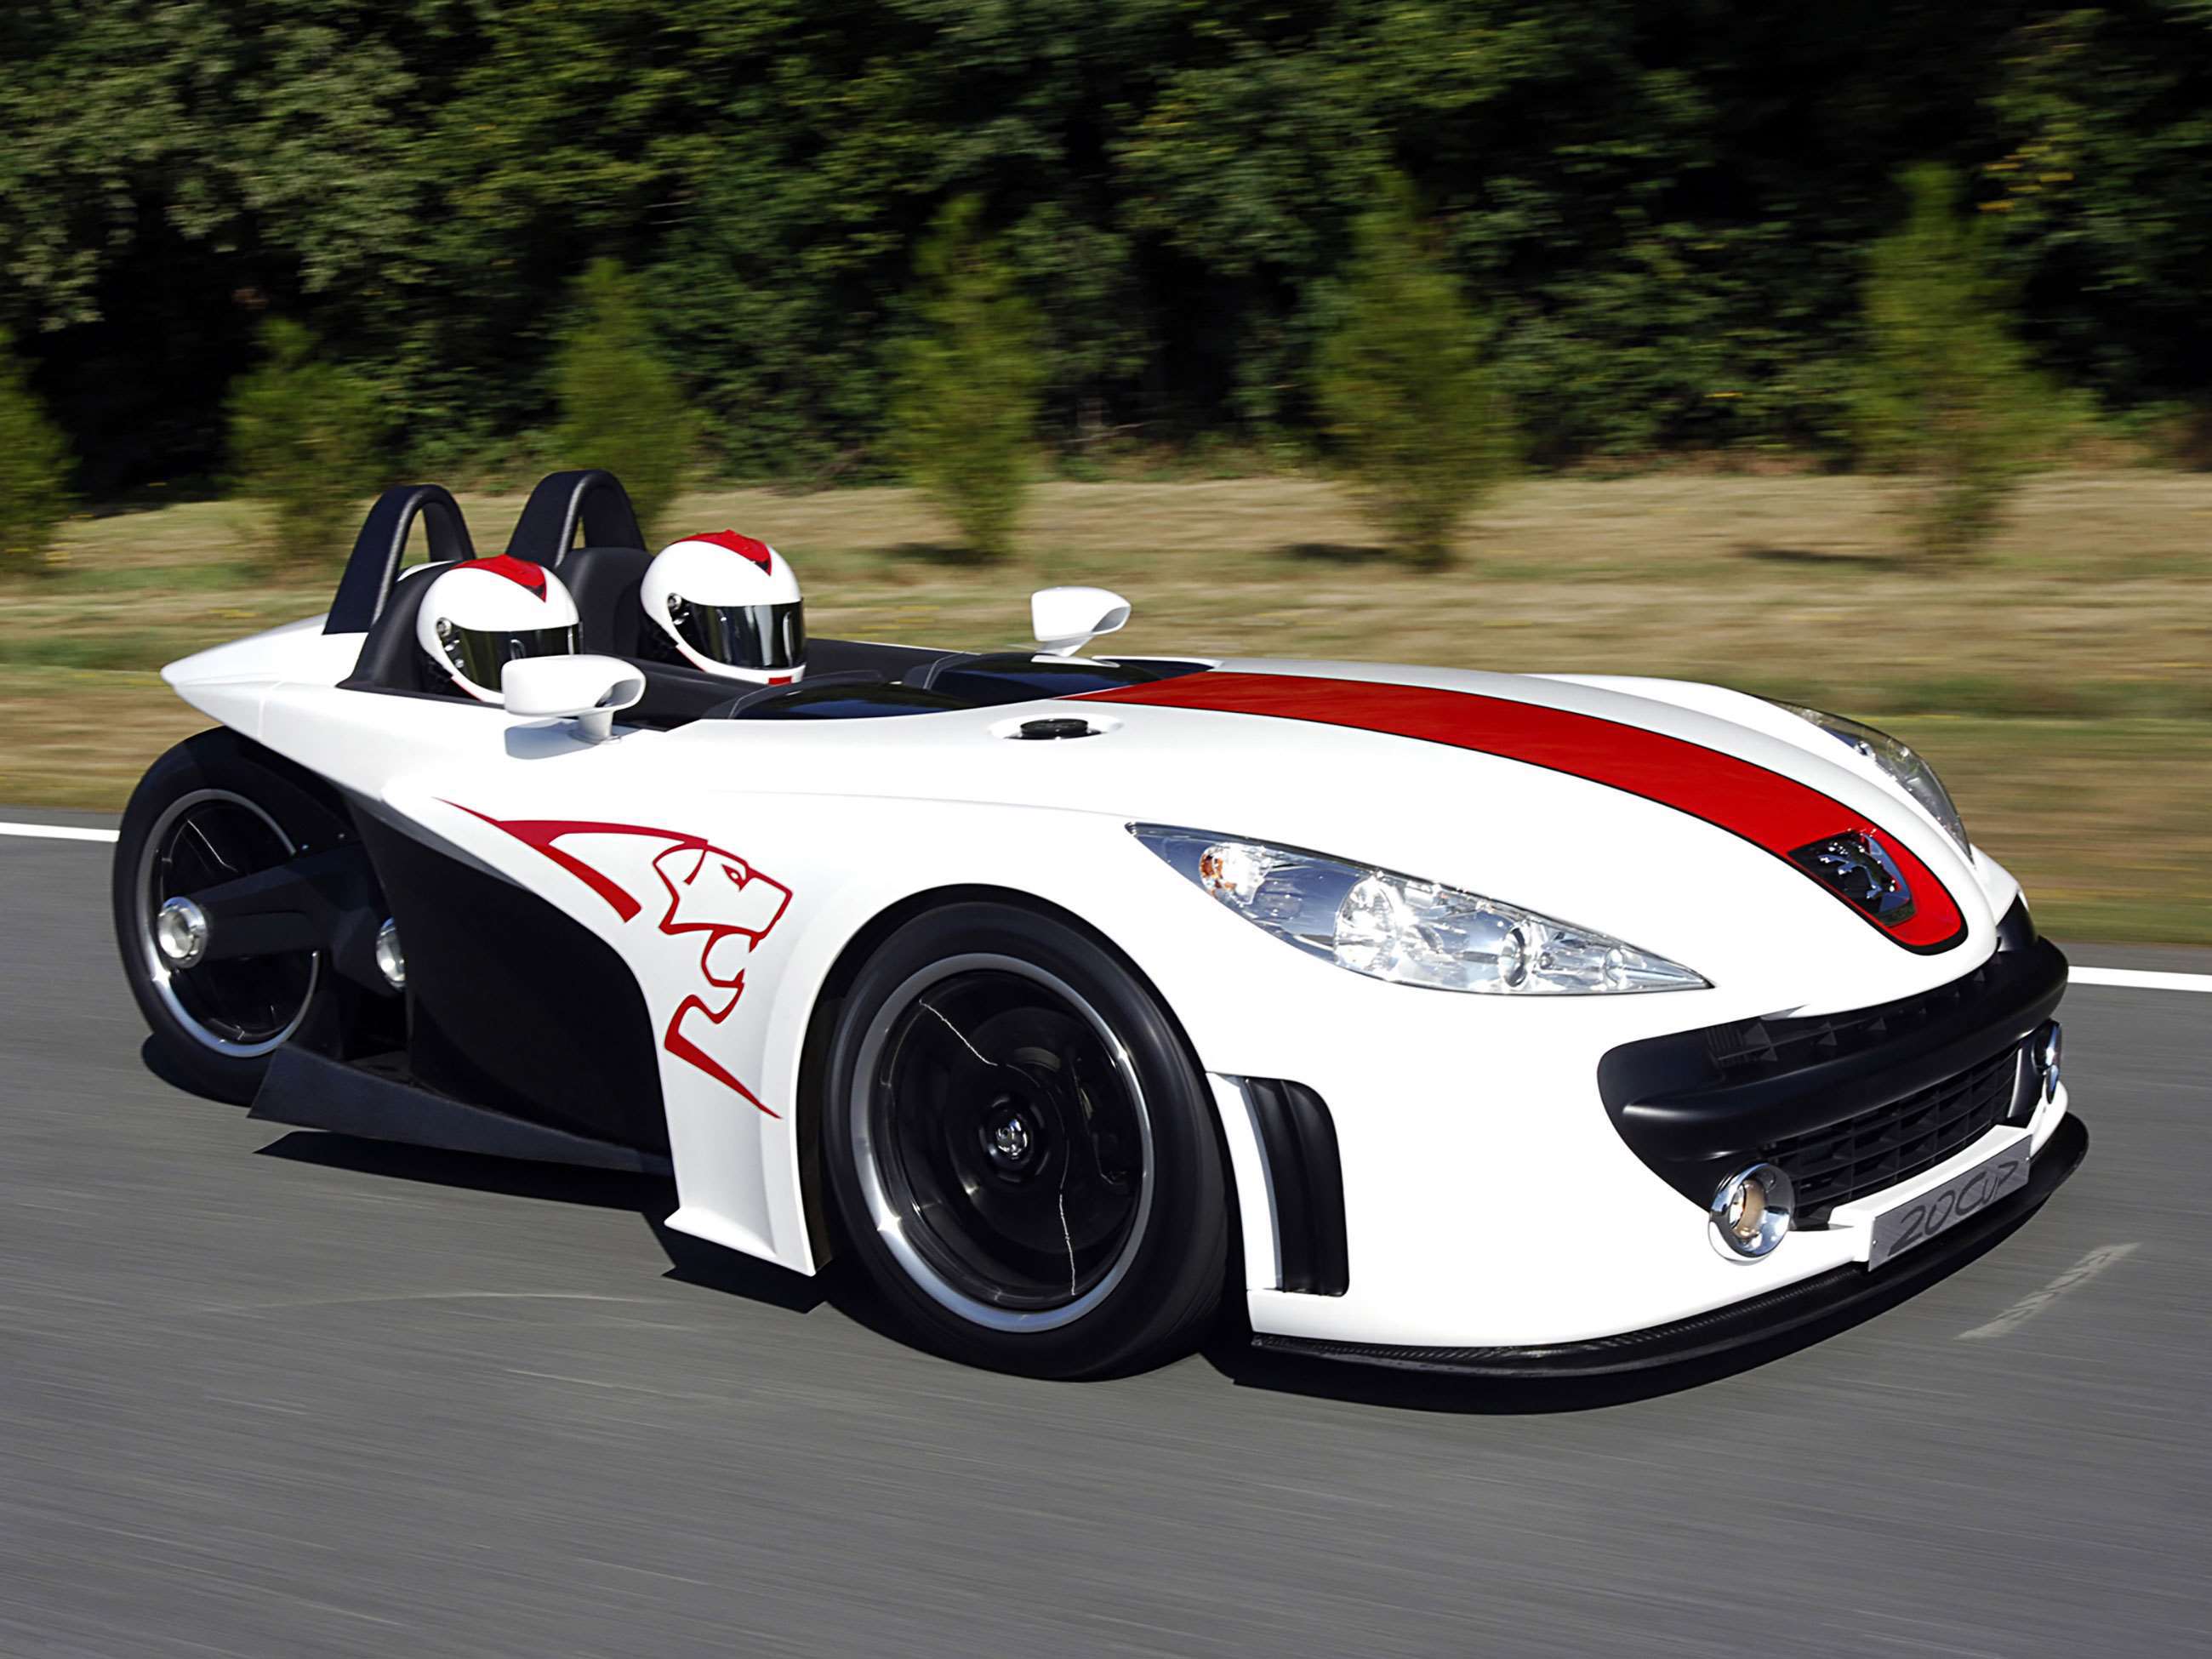 three-wheeled-cars-9-peugeot-20cup-concept-04032022.jpg